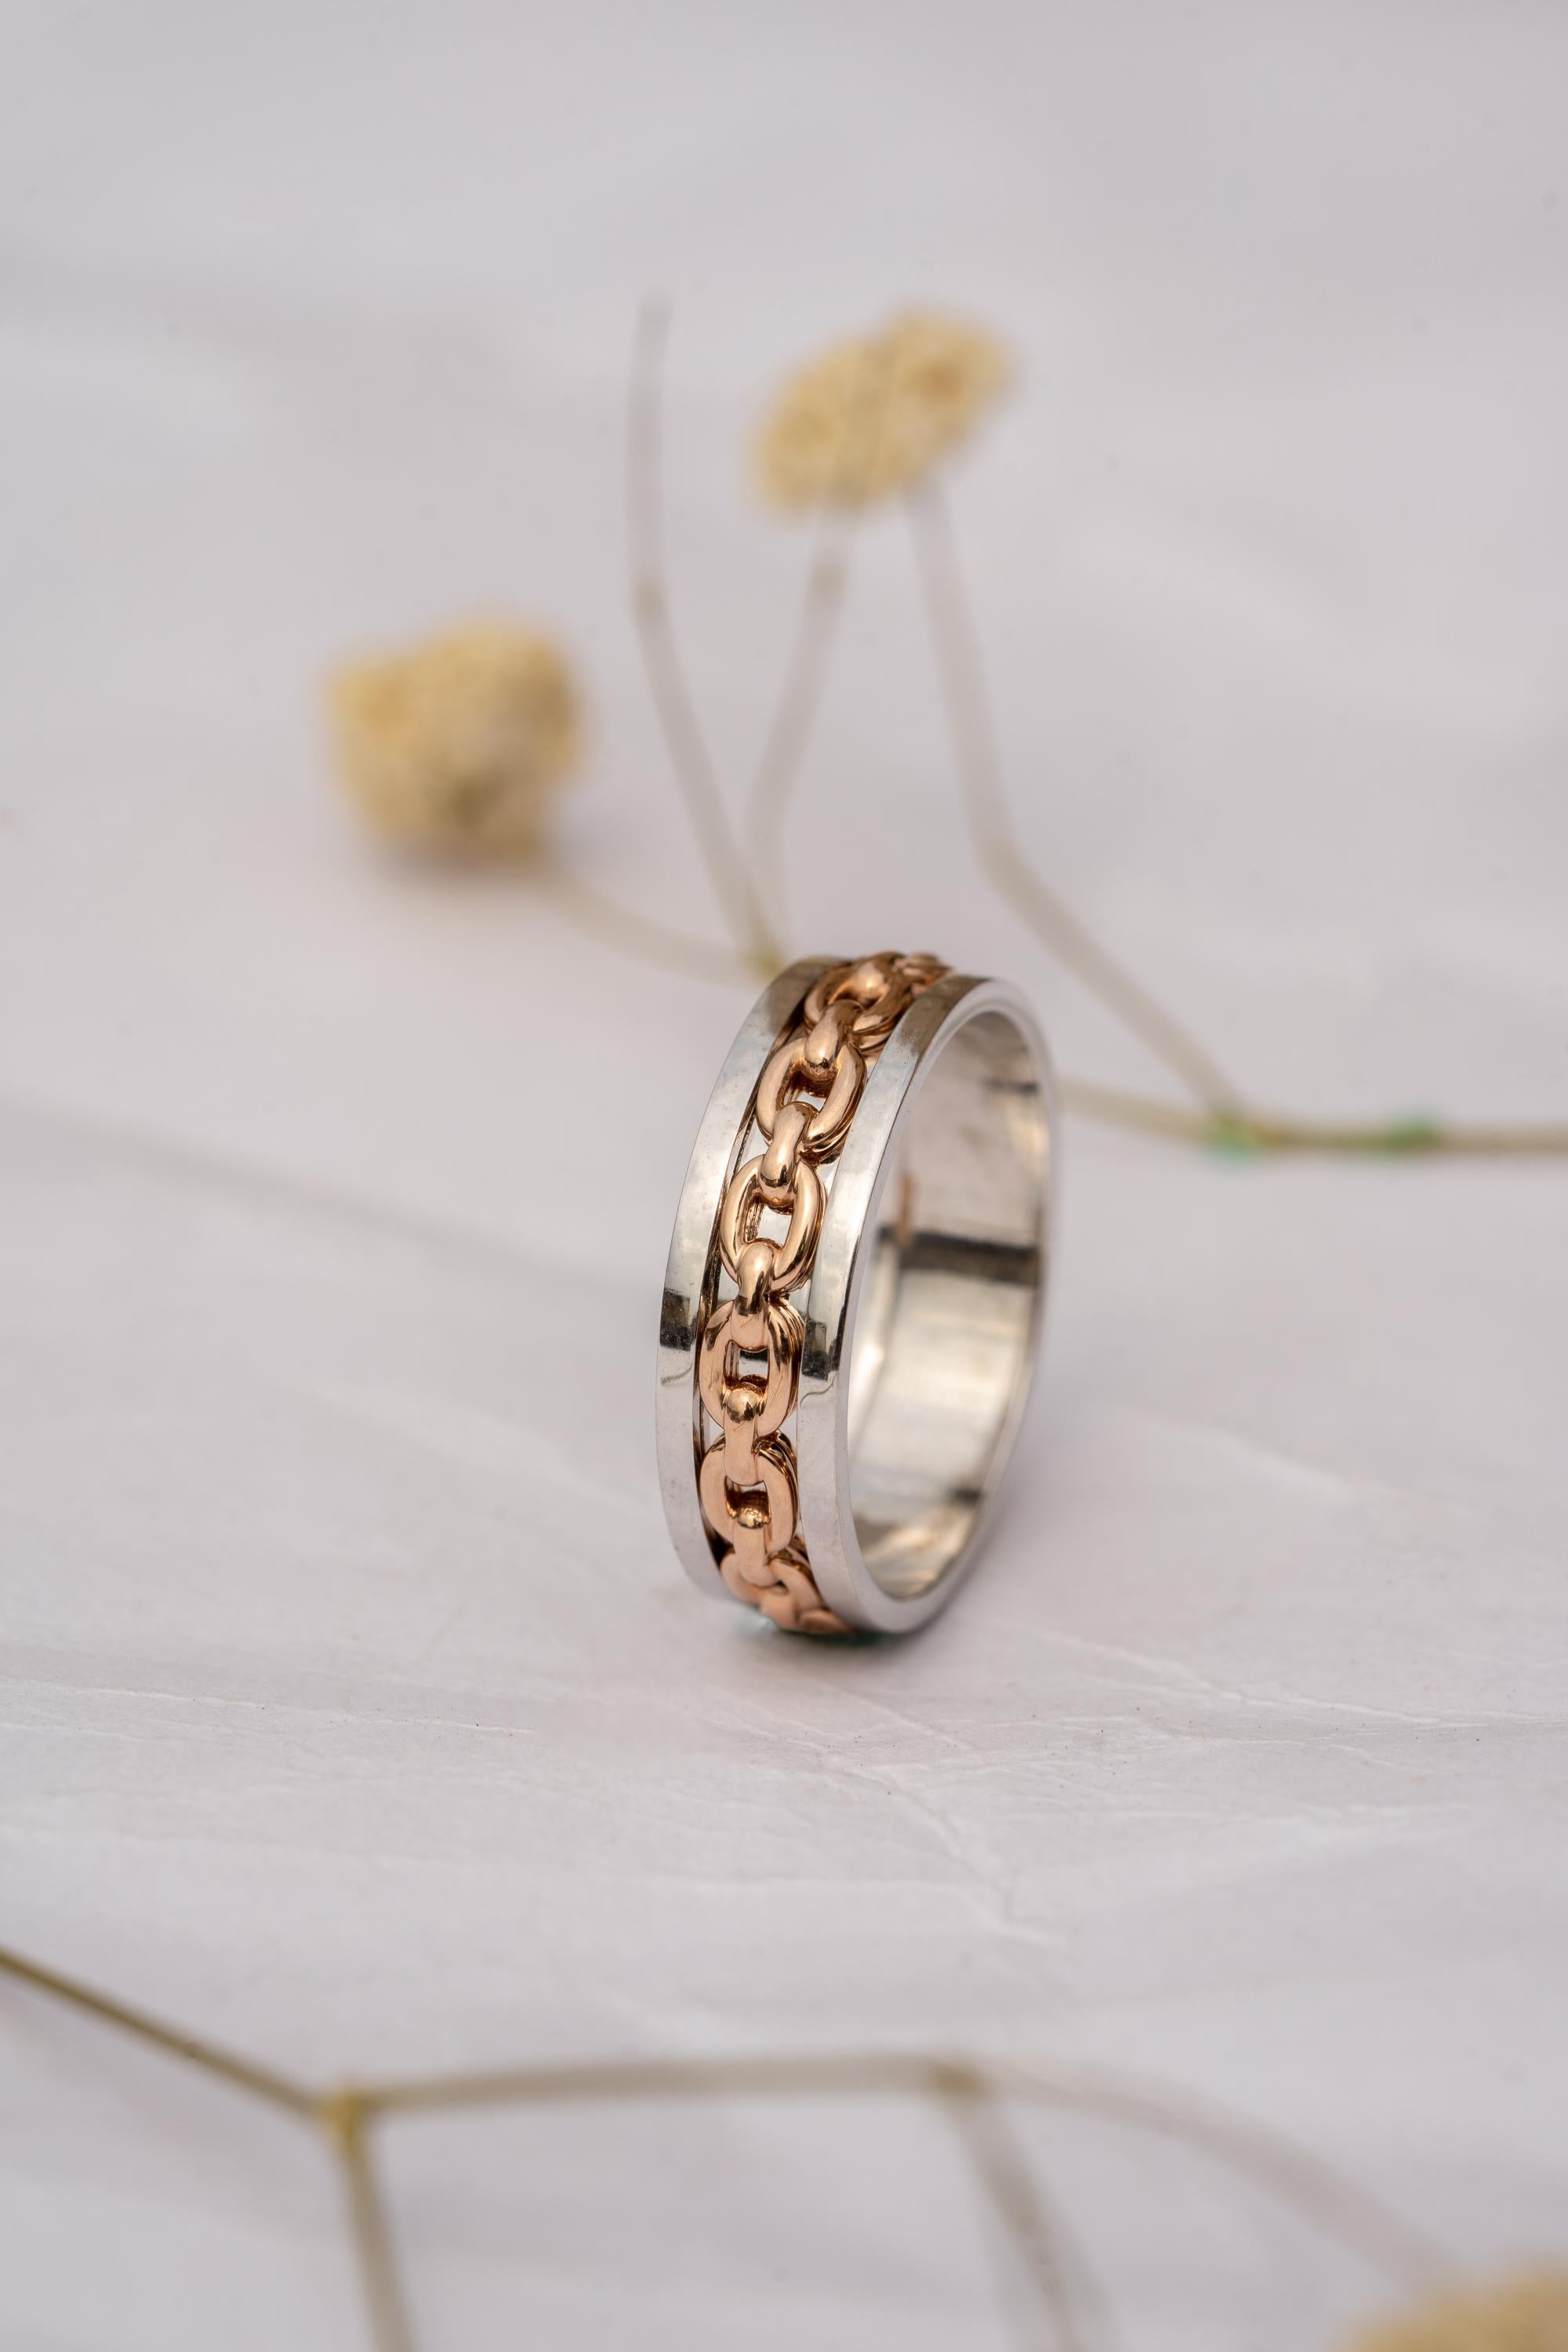 14k Two Tone gold his and her chain wedding rings